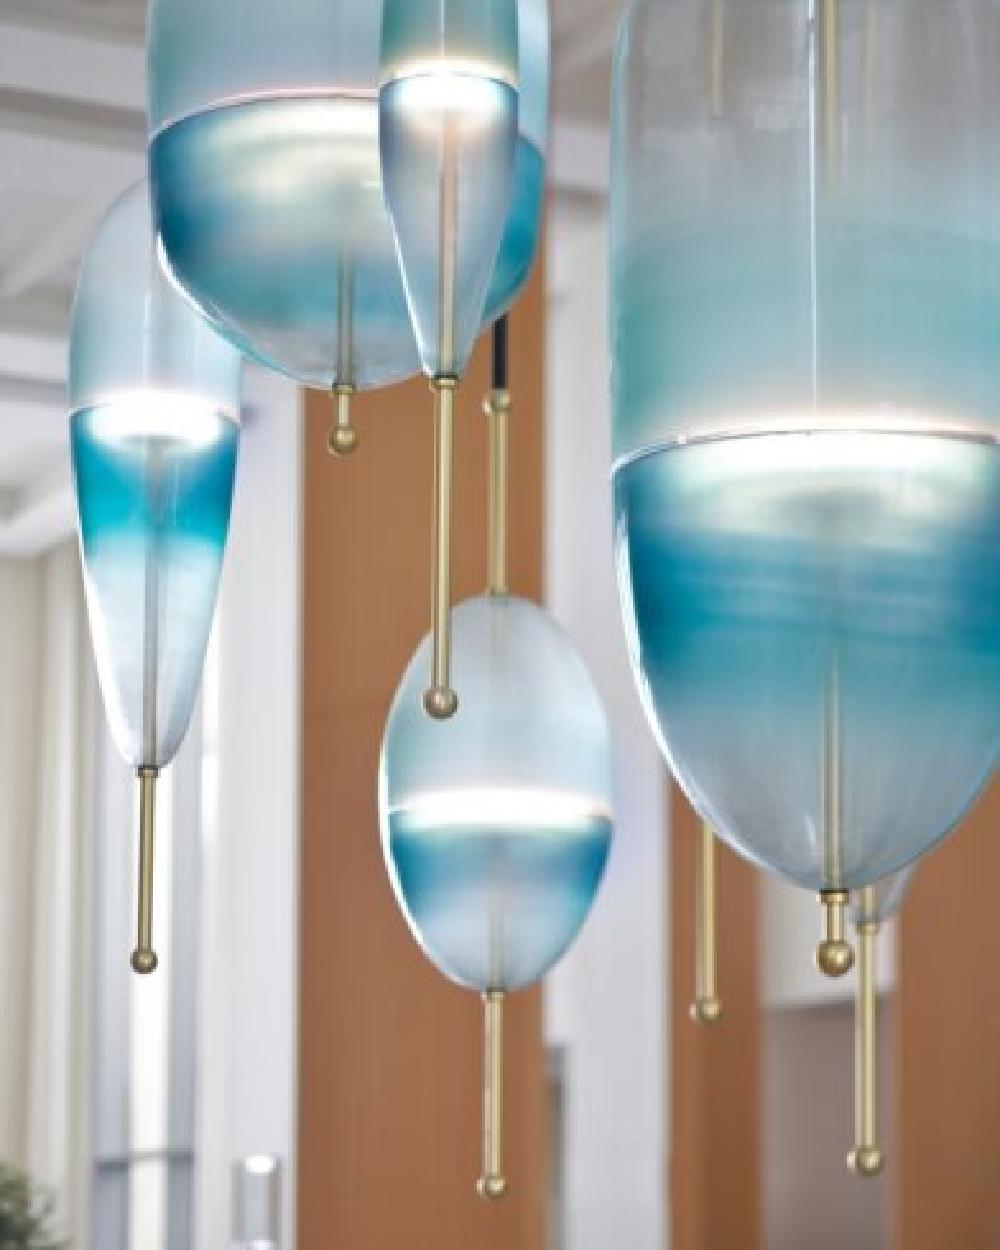 FLOW[T] S5 Pendant lamp in Turquoise by Nao Tamura for Wonderglass For Sale 2